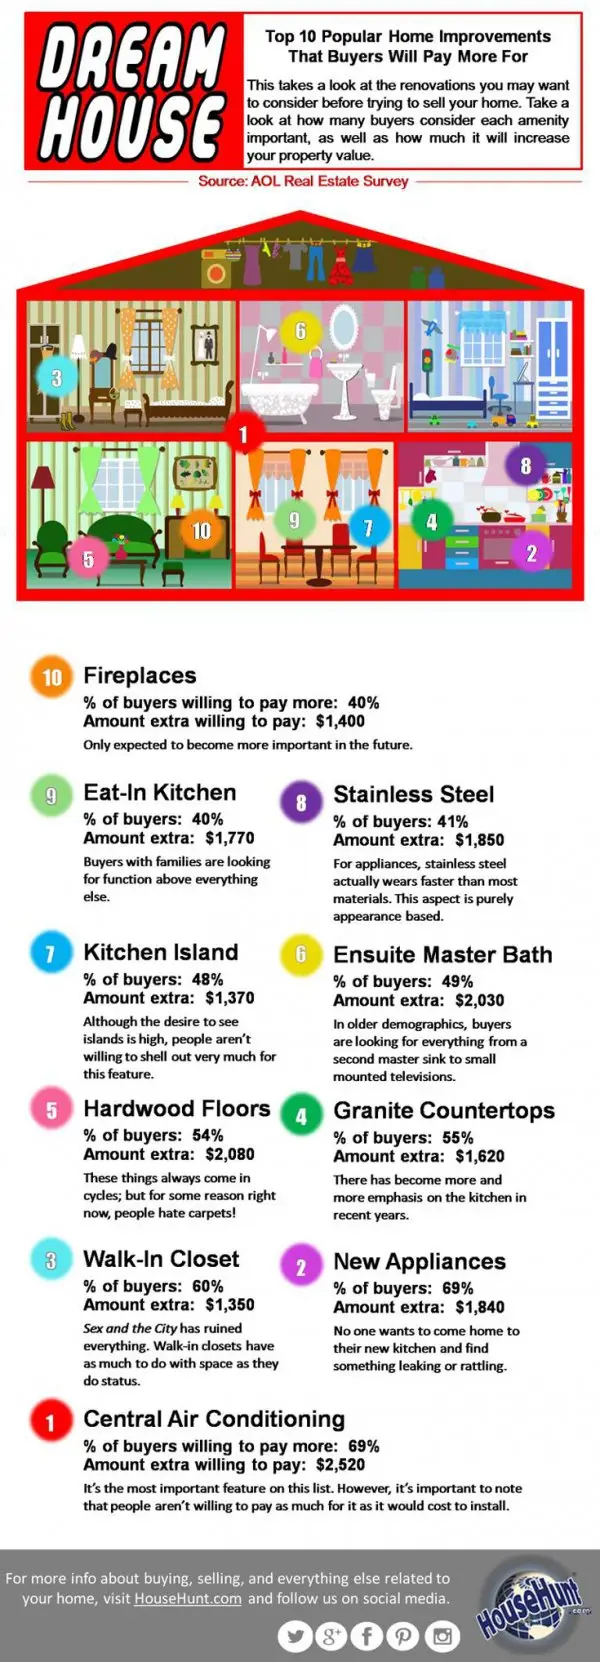 Home Improvements You Should Pay Attention to